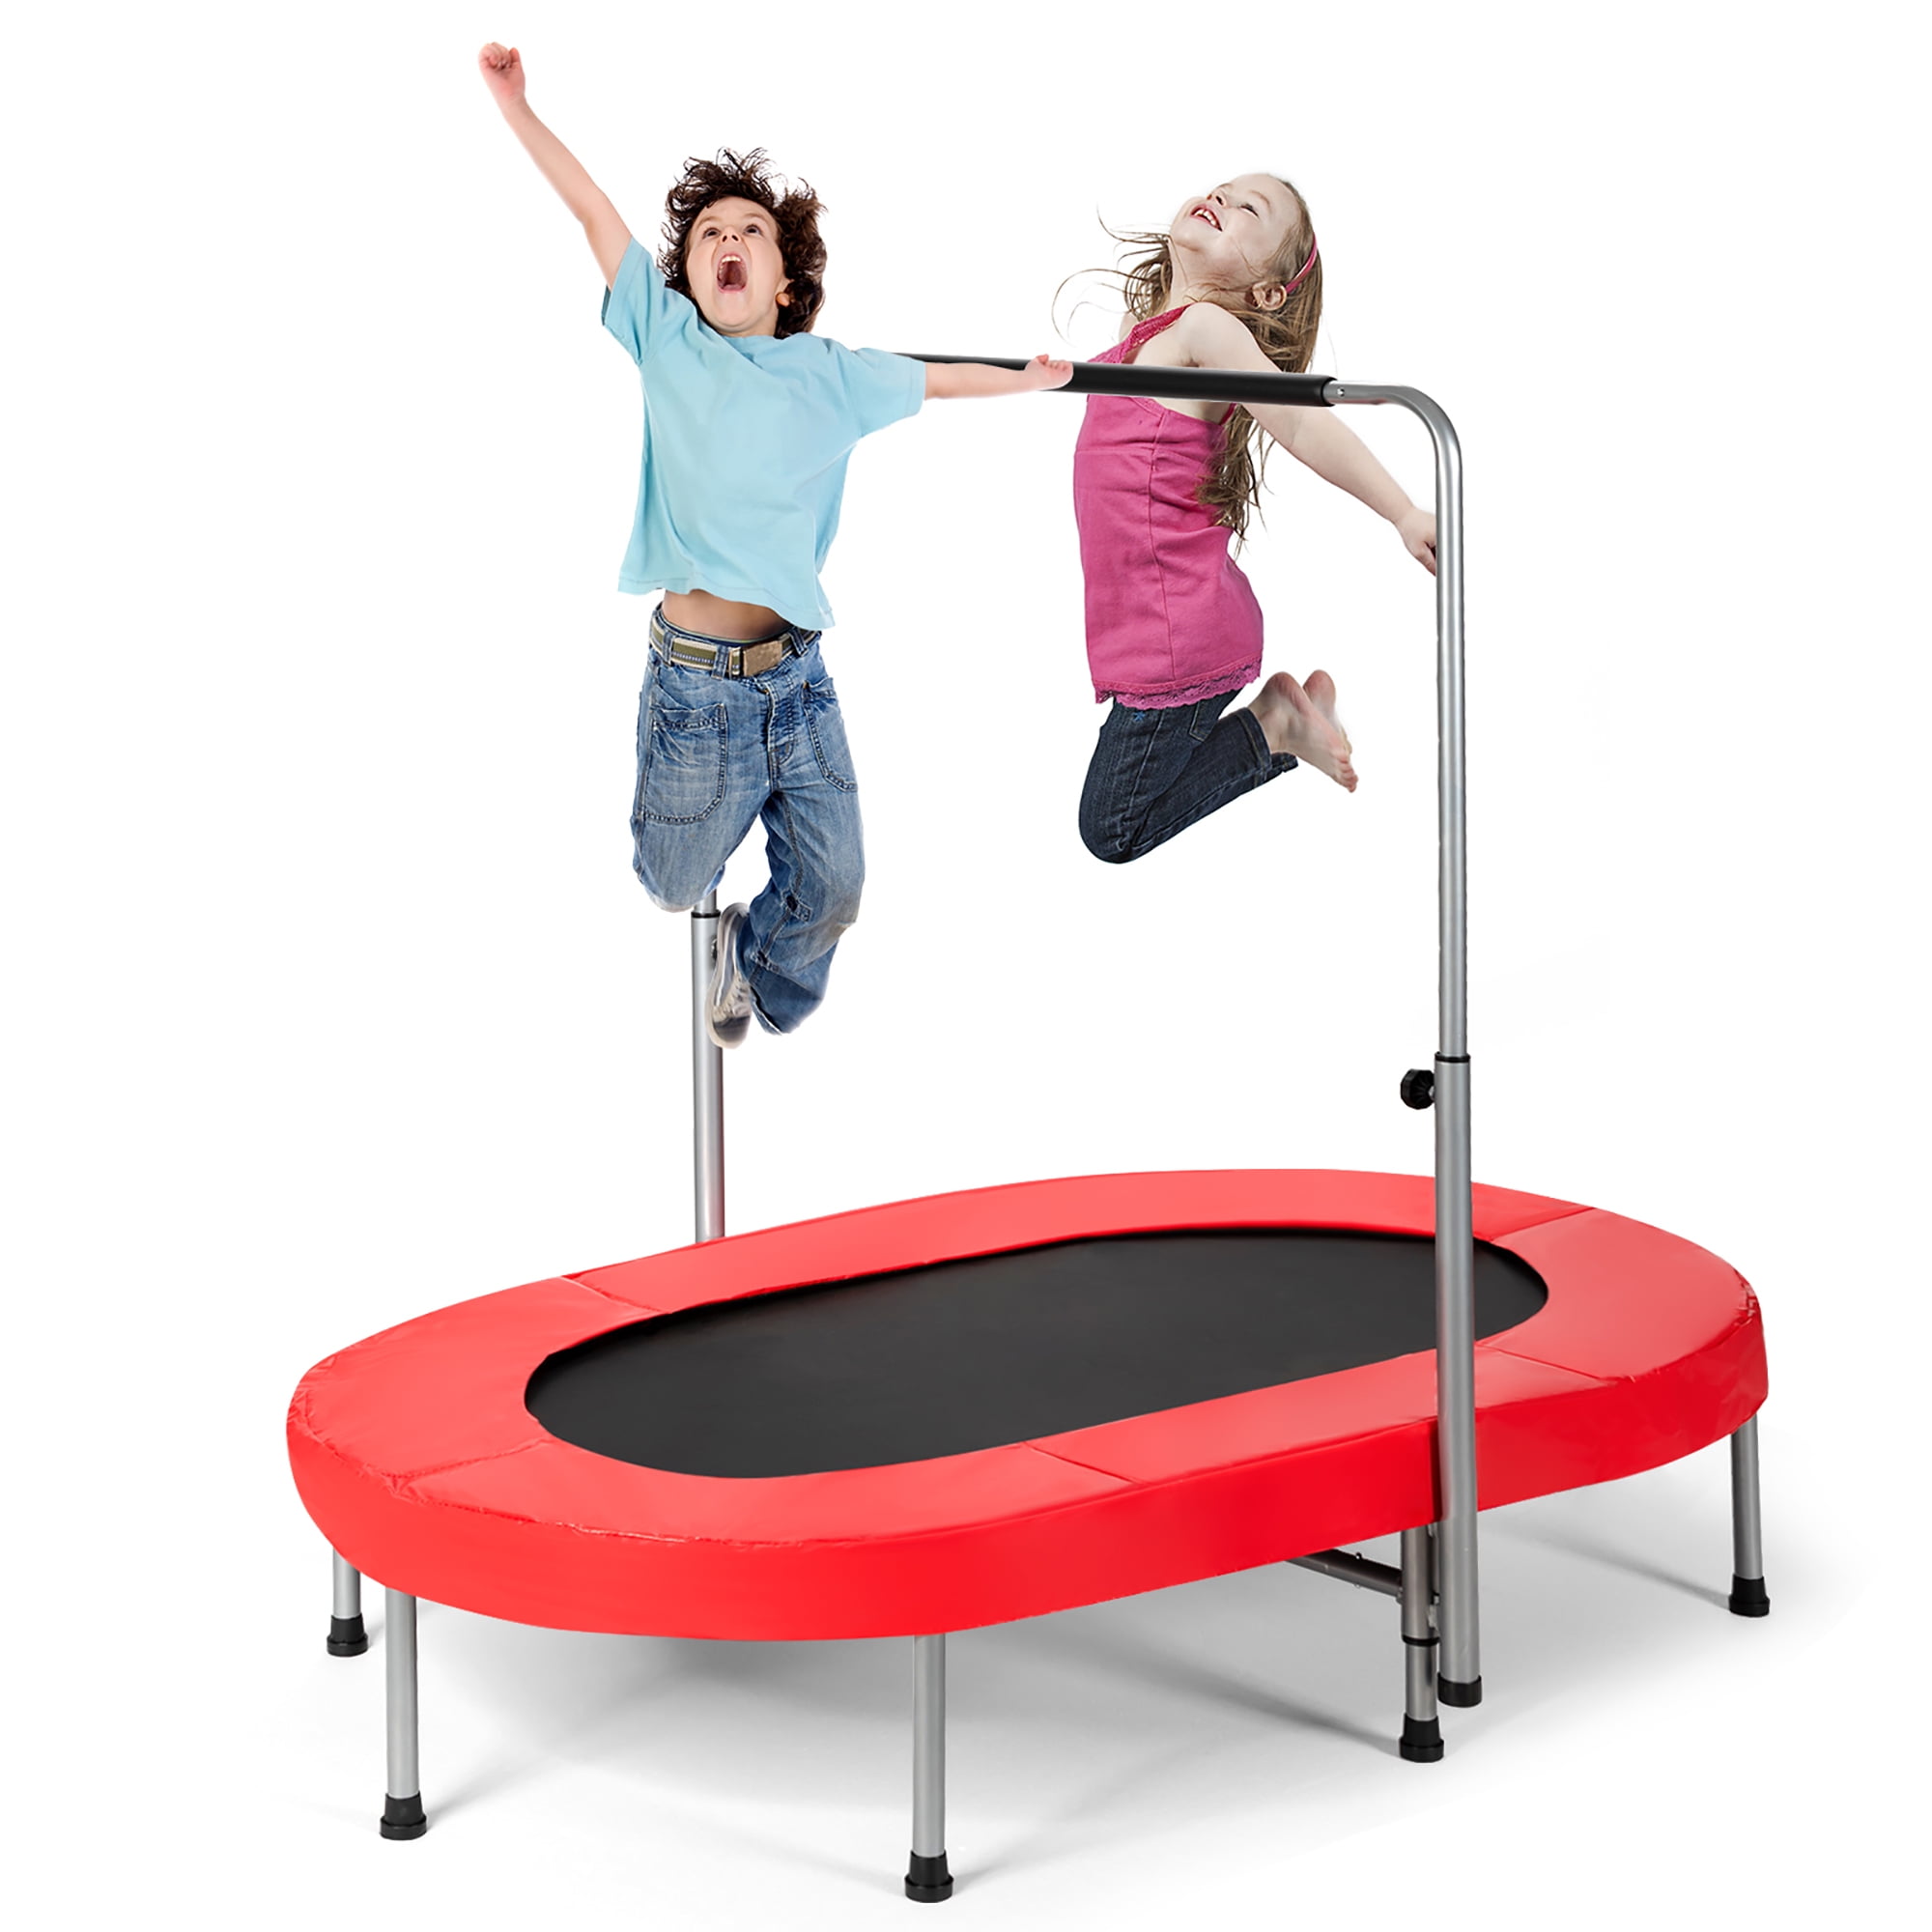 Details about   56" Foldable Mini Toy 2 Kids Trampoline Jump Handle Balance Exercise Play Sports 